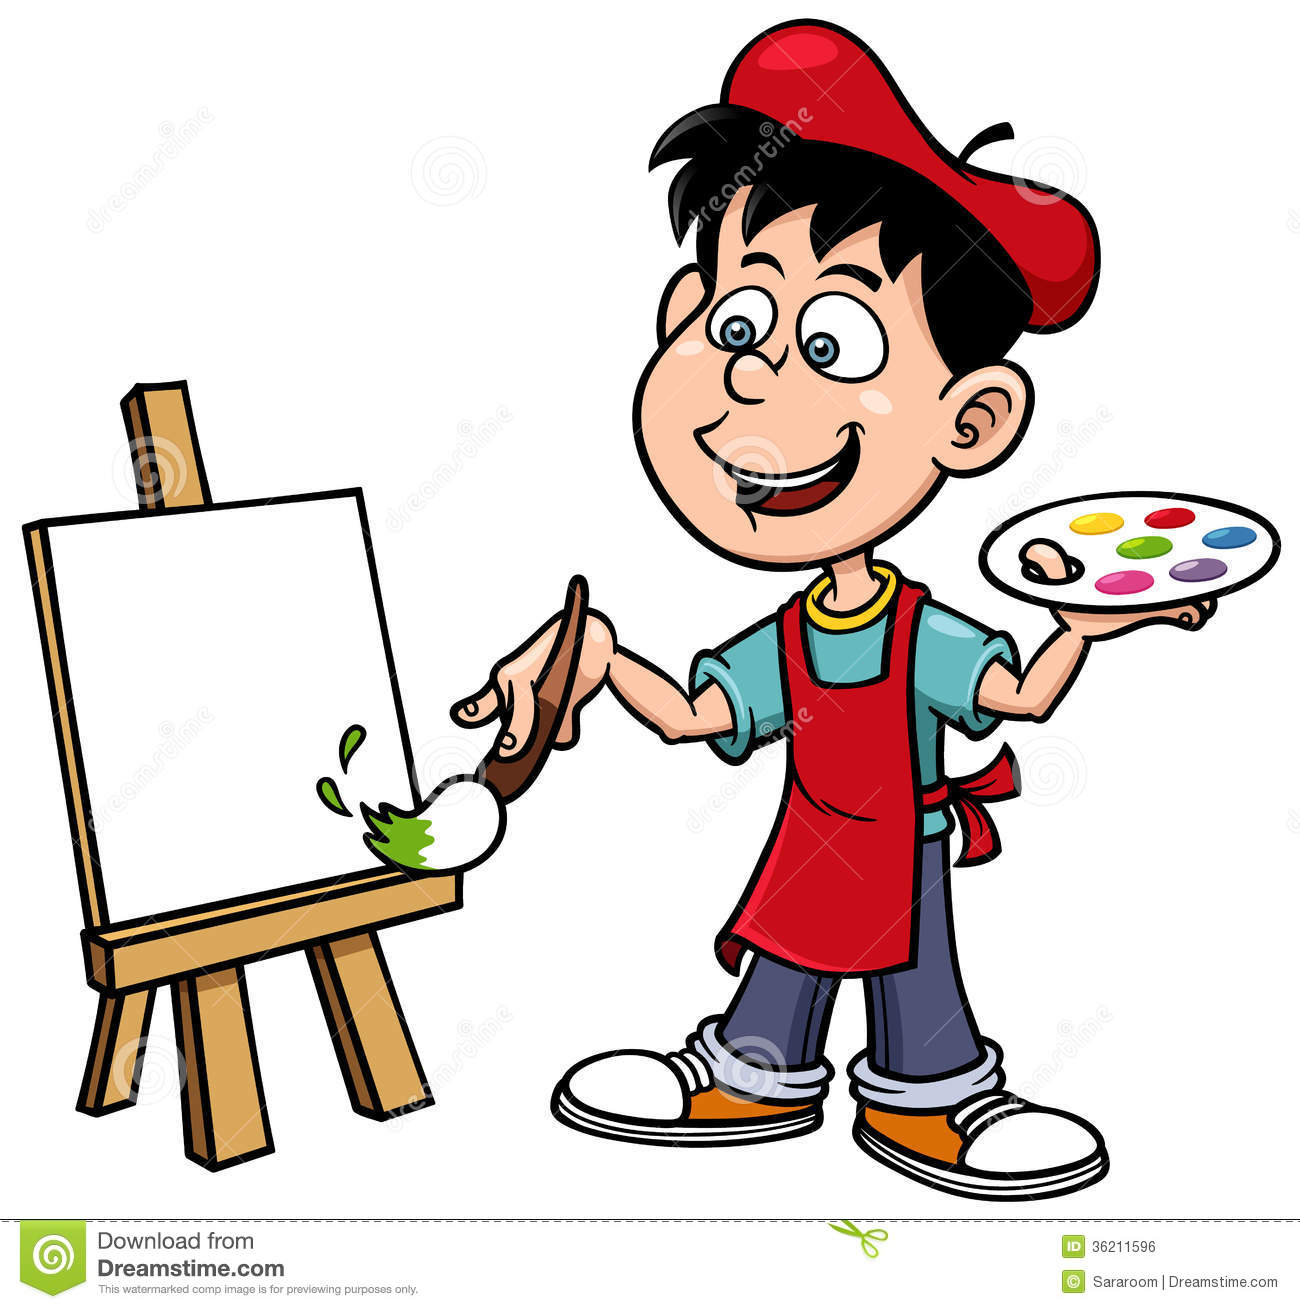 Painters clipart - Clipground